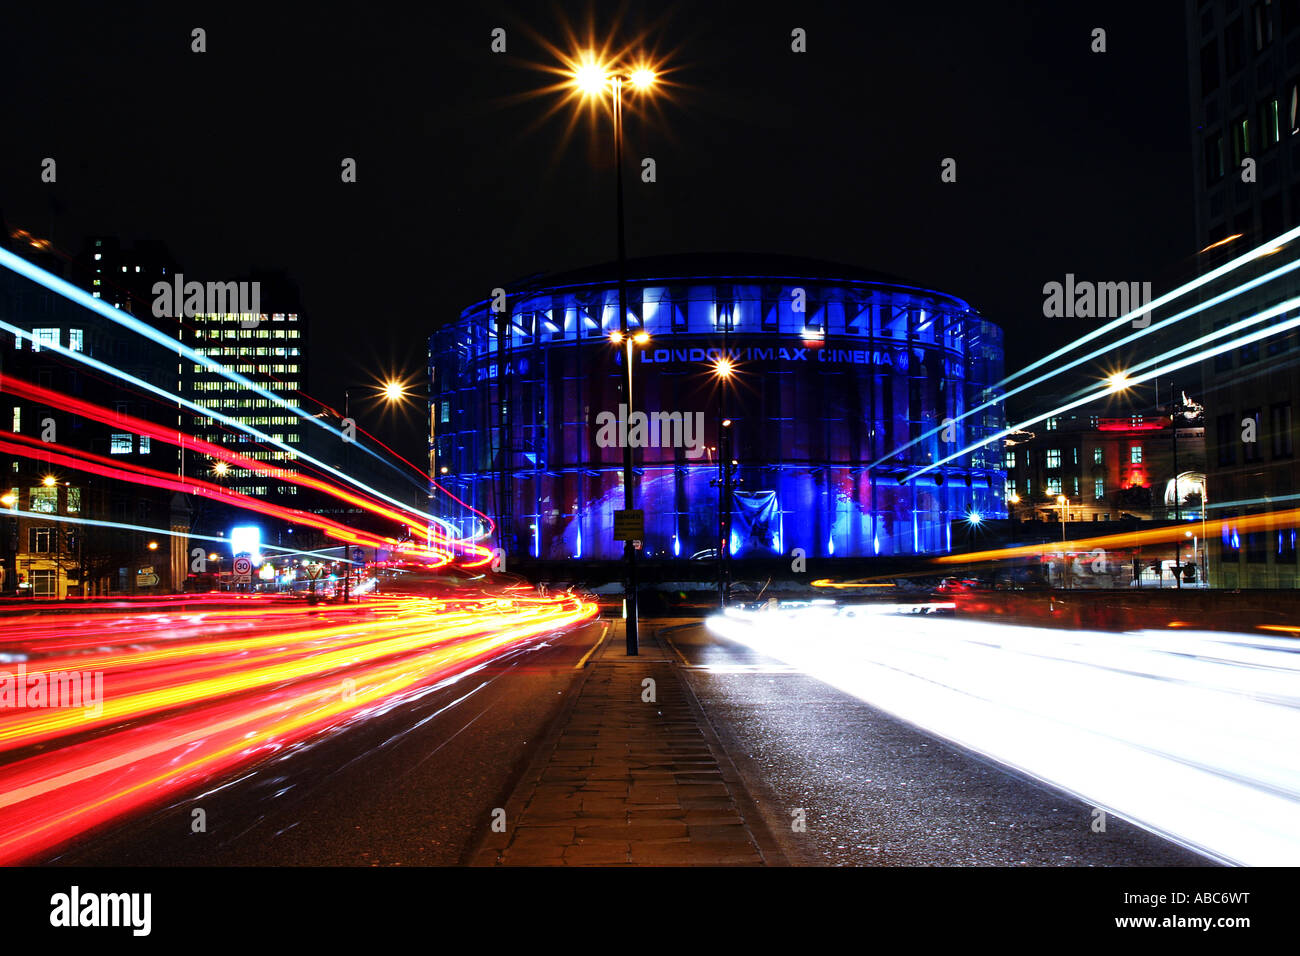 The BFI Imax cinema in London has the largest cinema screen in the UK. Films are shown in 2D and 3D. Stock Photo